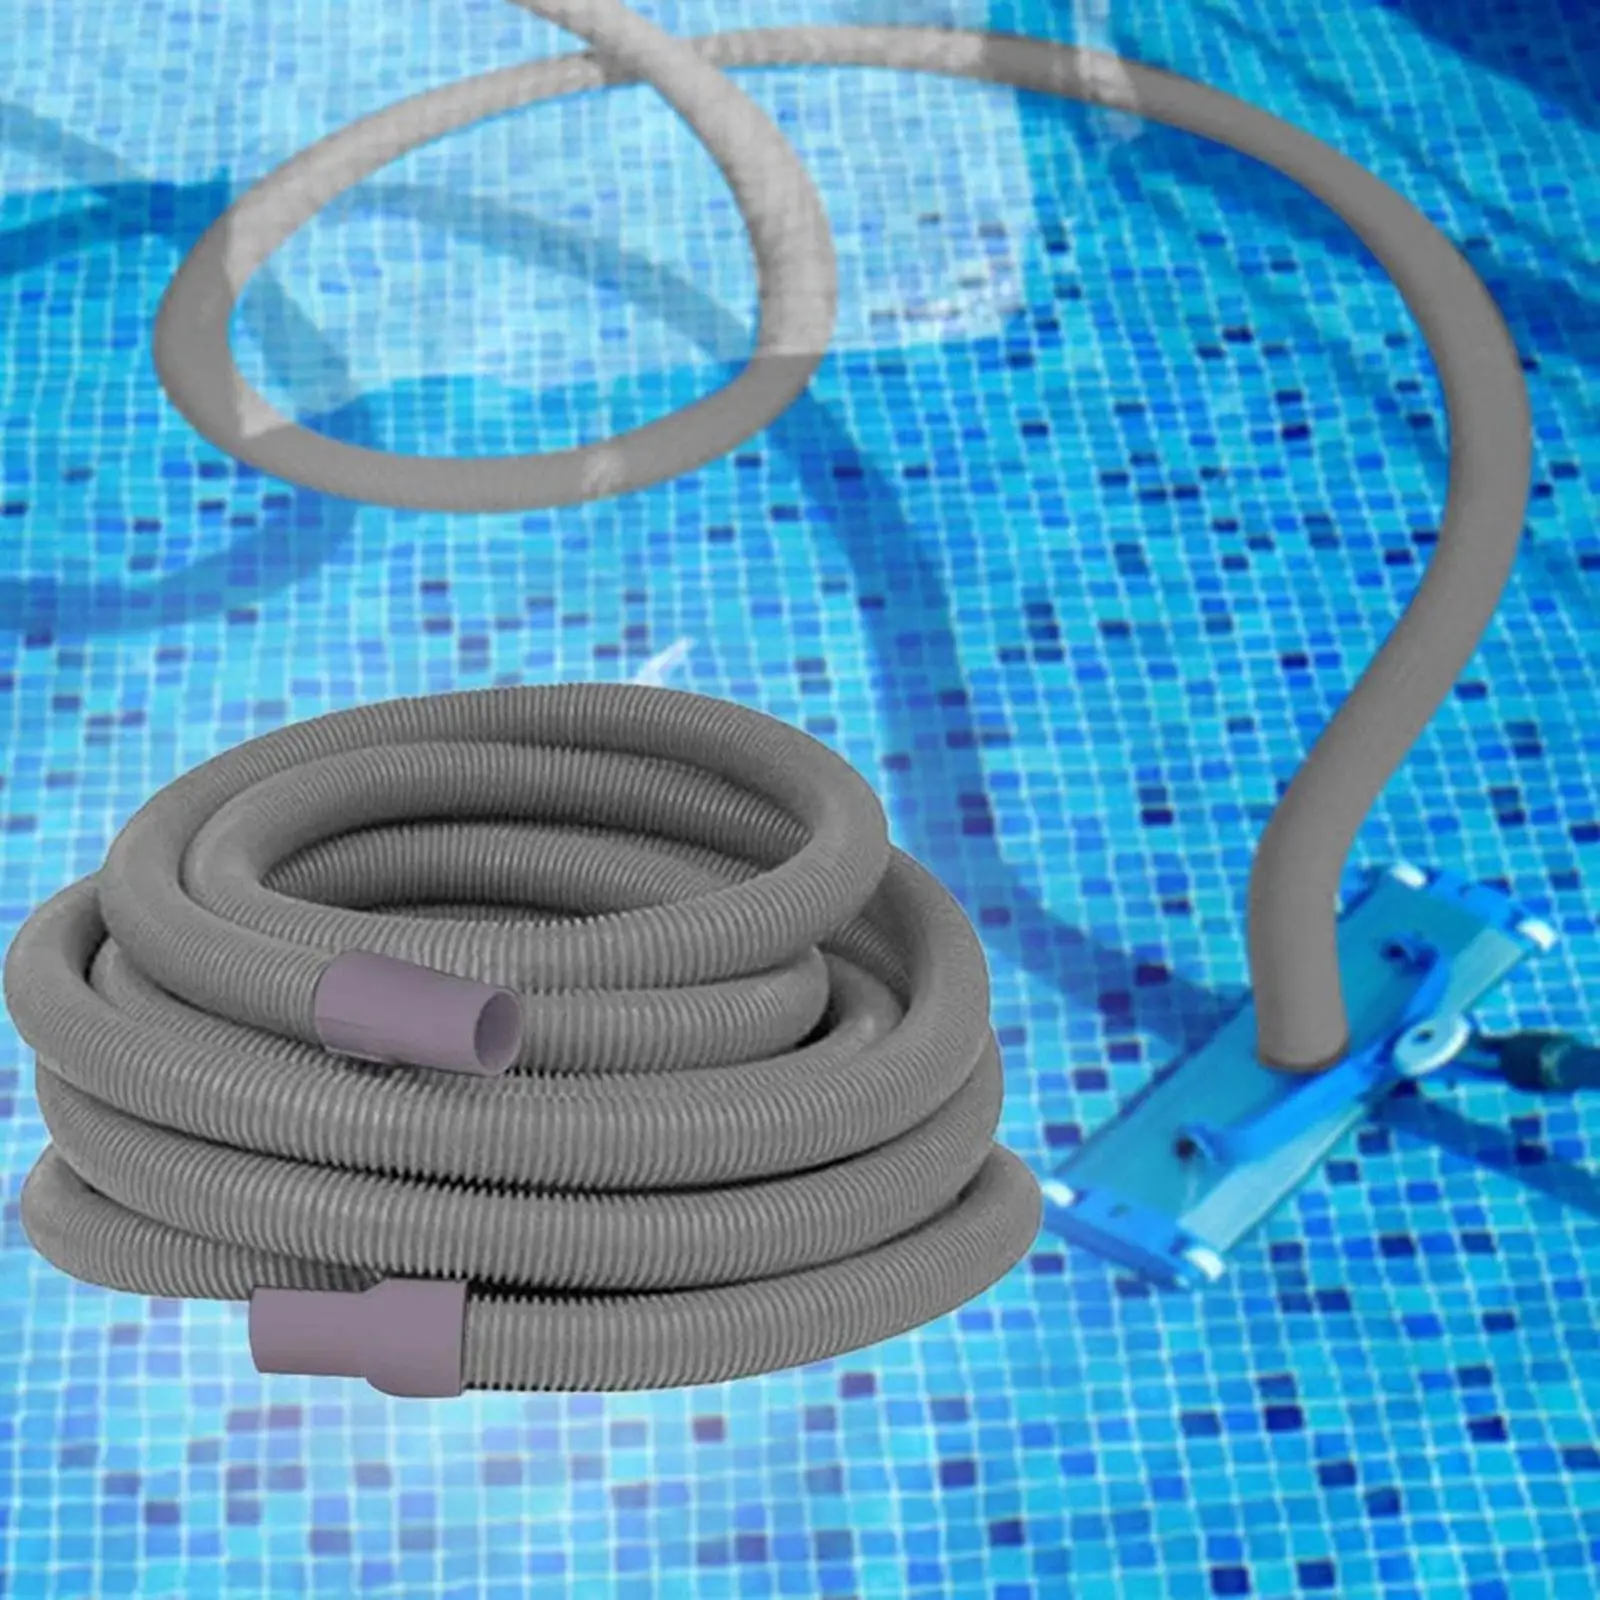 Heavy Duty Ground Pool Vacuum Hose with Swivel Cuff Durable Connector Portable Gray Flexible for Pool Filters Pools